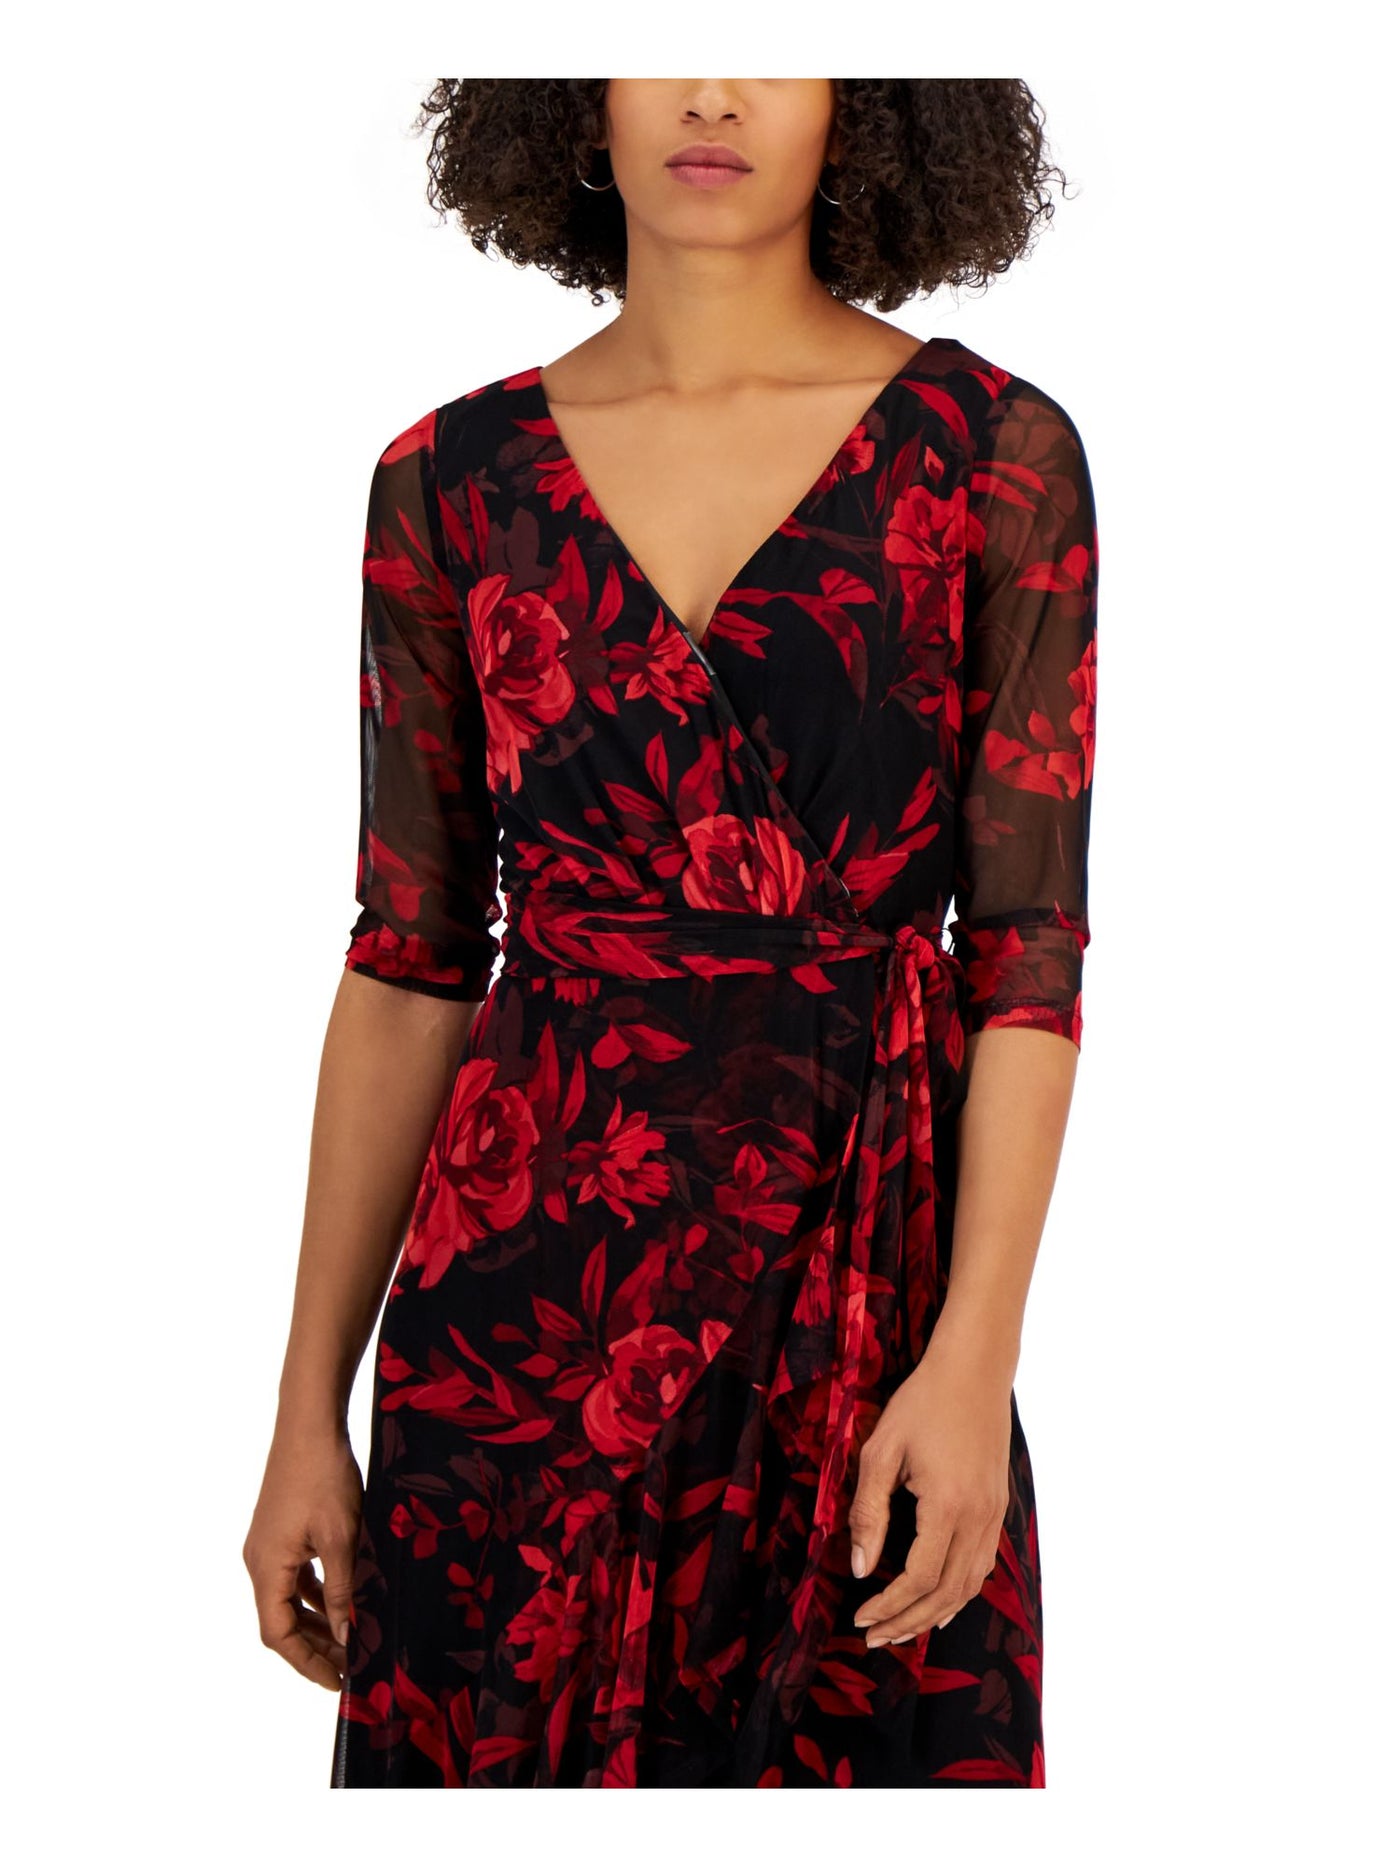 CONNECTED APPAREL Womens Red Lined Sheer Pullover Tie Belt Floral 3/4 Sleeve Surplice Neckline Midi Hi-Lo Dress 16